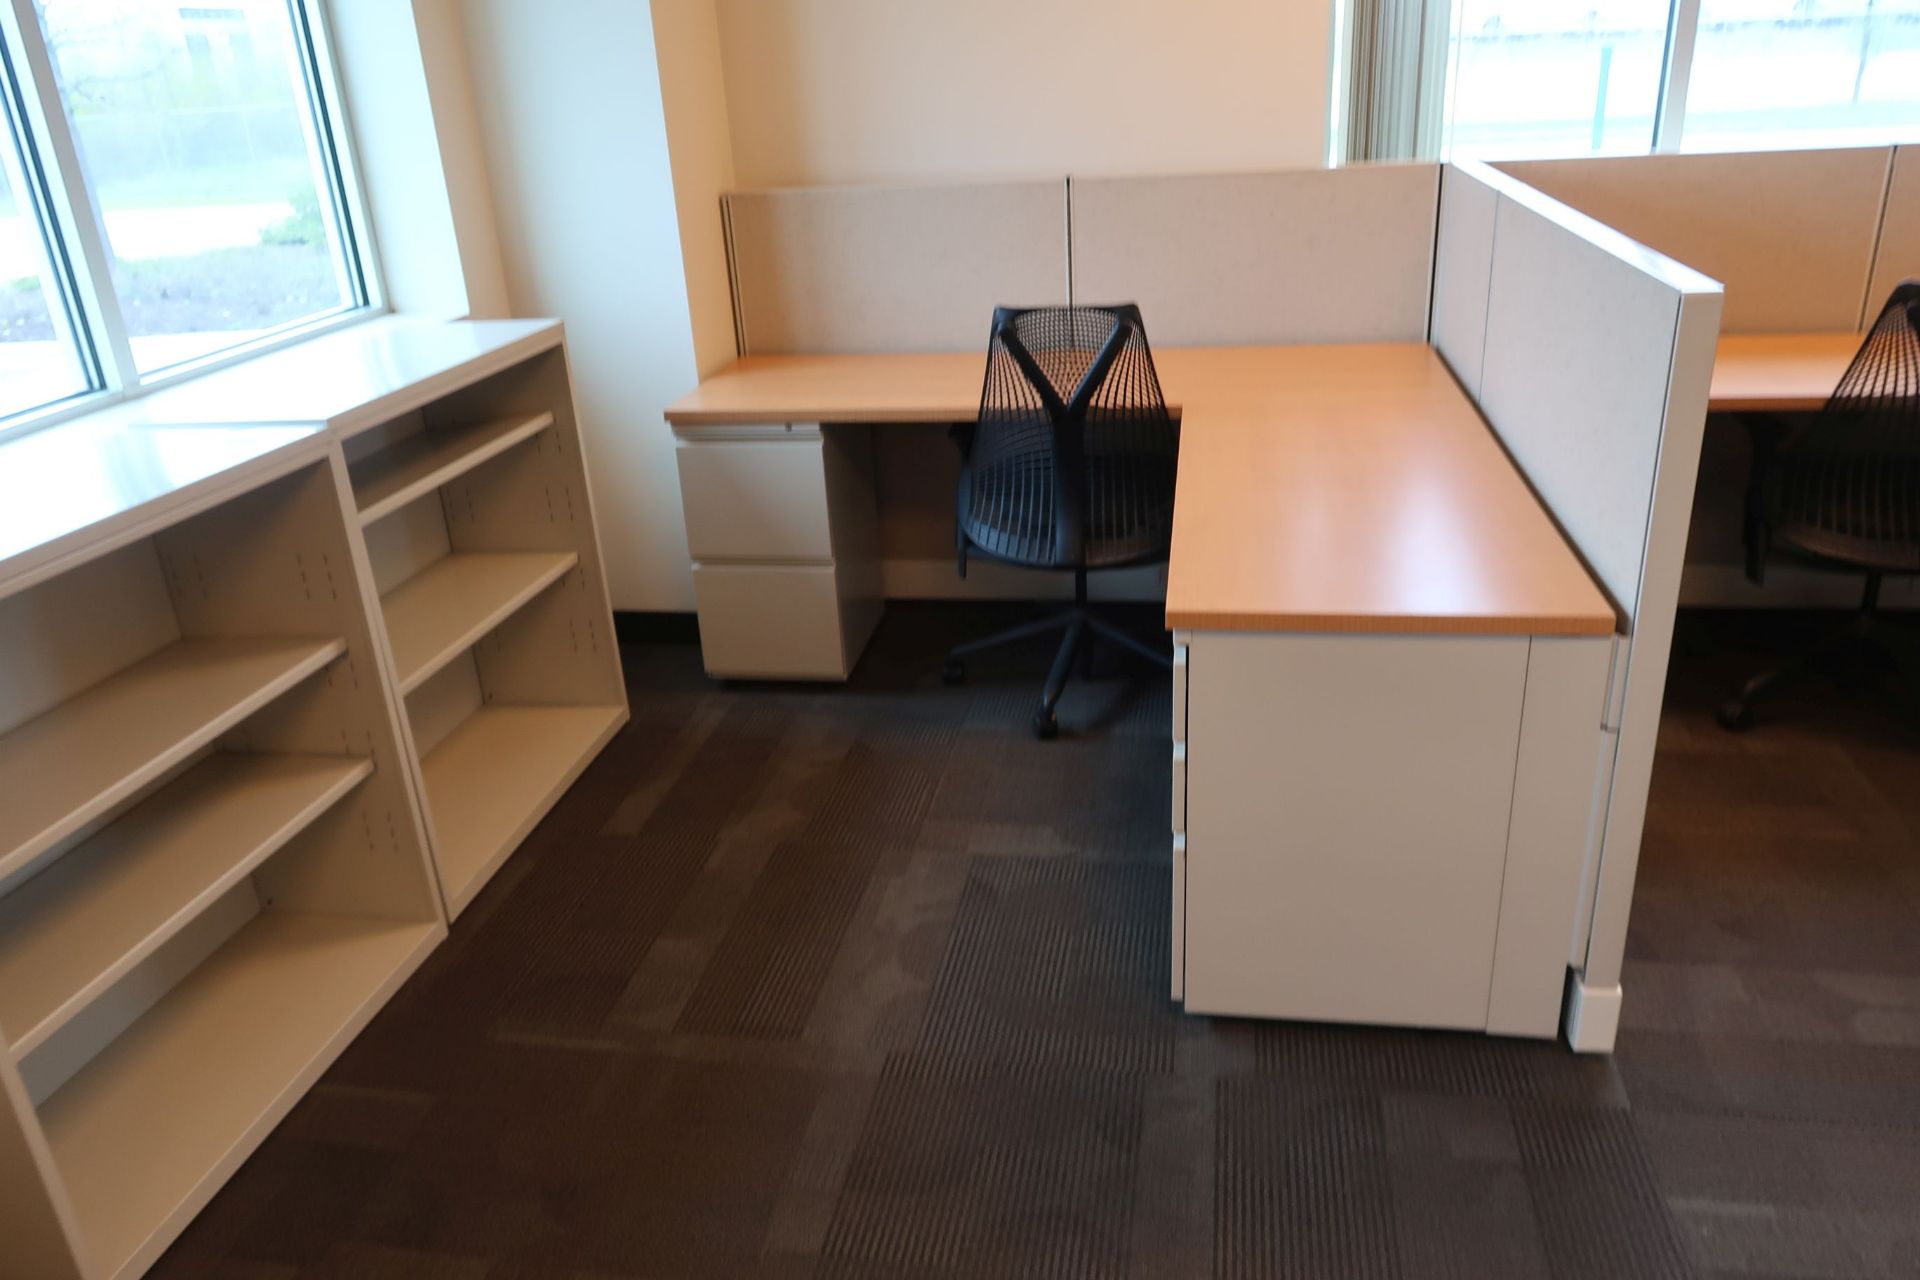 (LOT) 4-PERSON HERMAN MILLER CUBICLE SET 47" HIGH WALLS WITH CHAIRS - Image 5 of 5